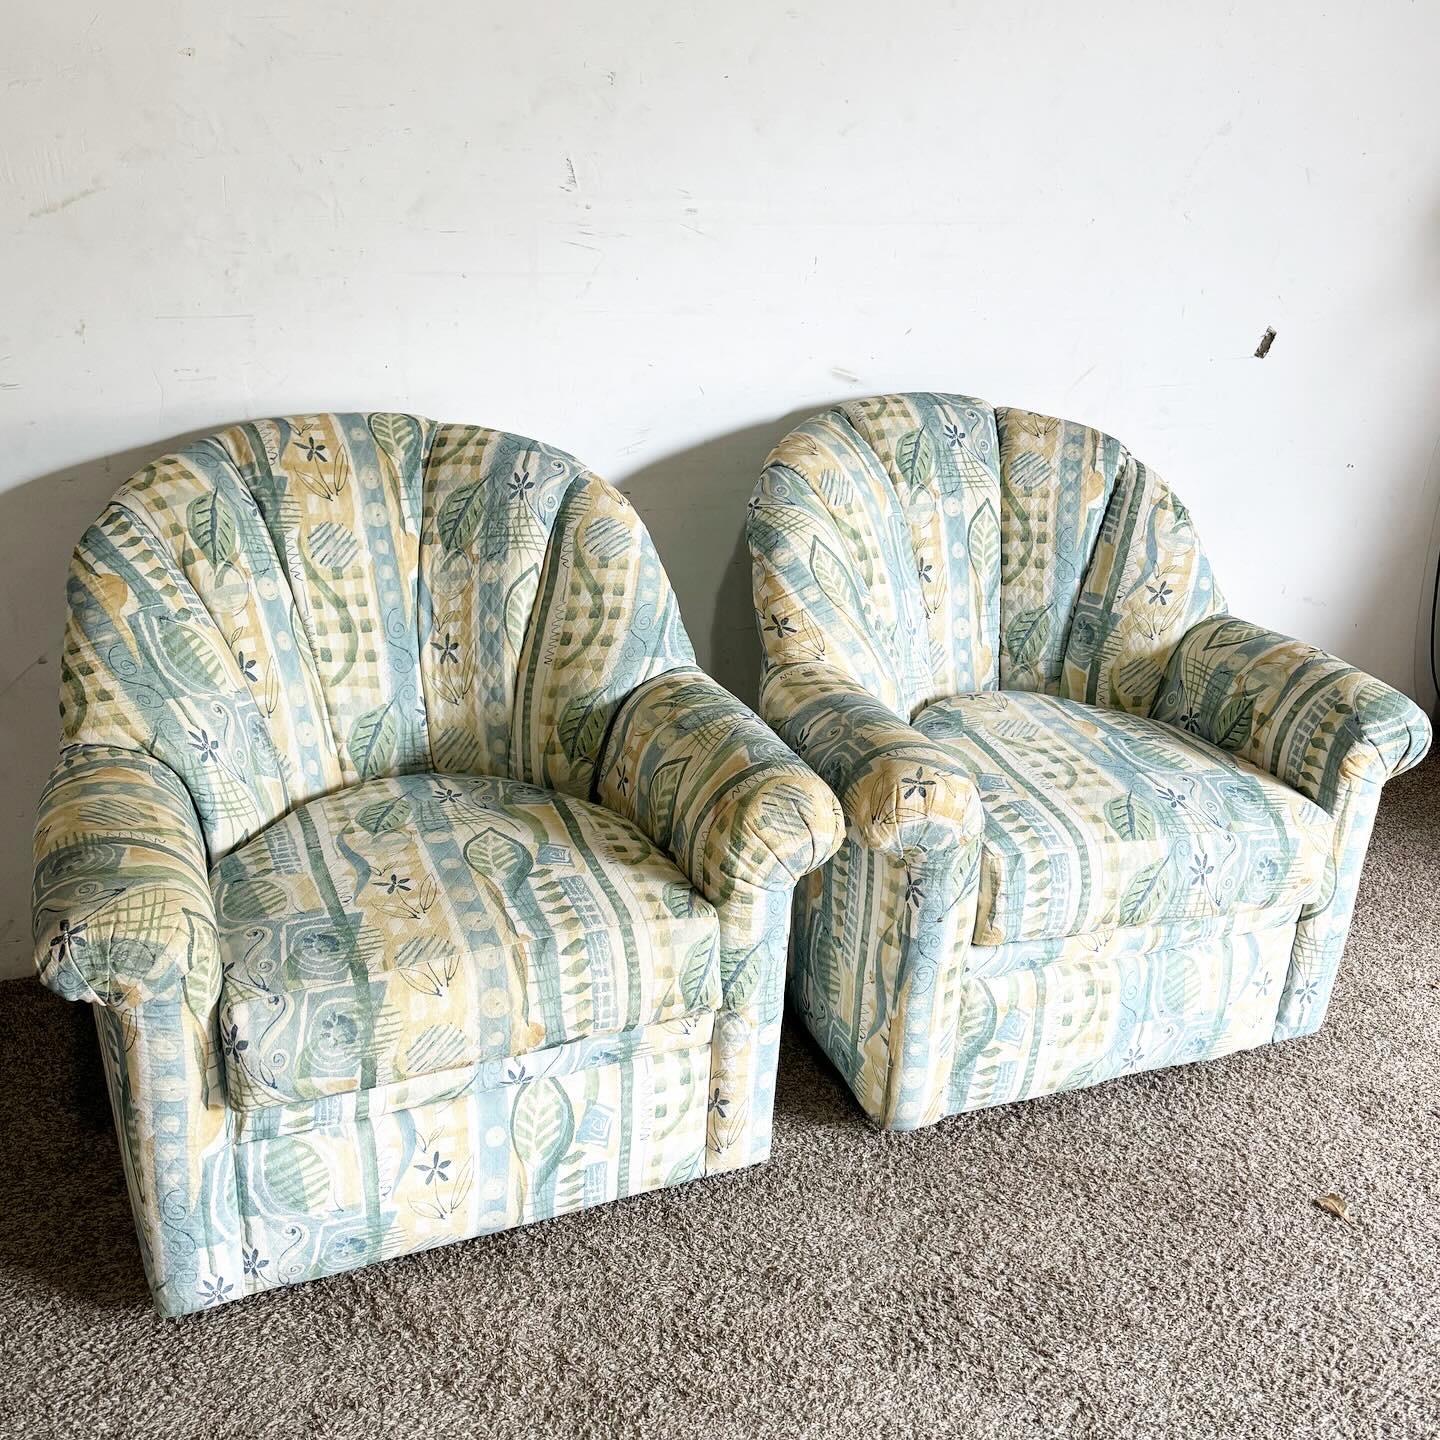 Embrace the charm of postmodern design with this pair of Postmodern Floral Patterned Fabric Swivel Chairs. These dynamic chairs feature bold, colorful floral patterns that bring a sophisticated yet playful atmosphere to any setting. Equipped with a